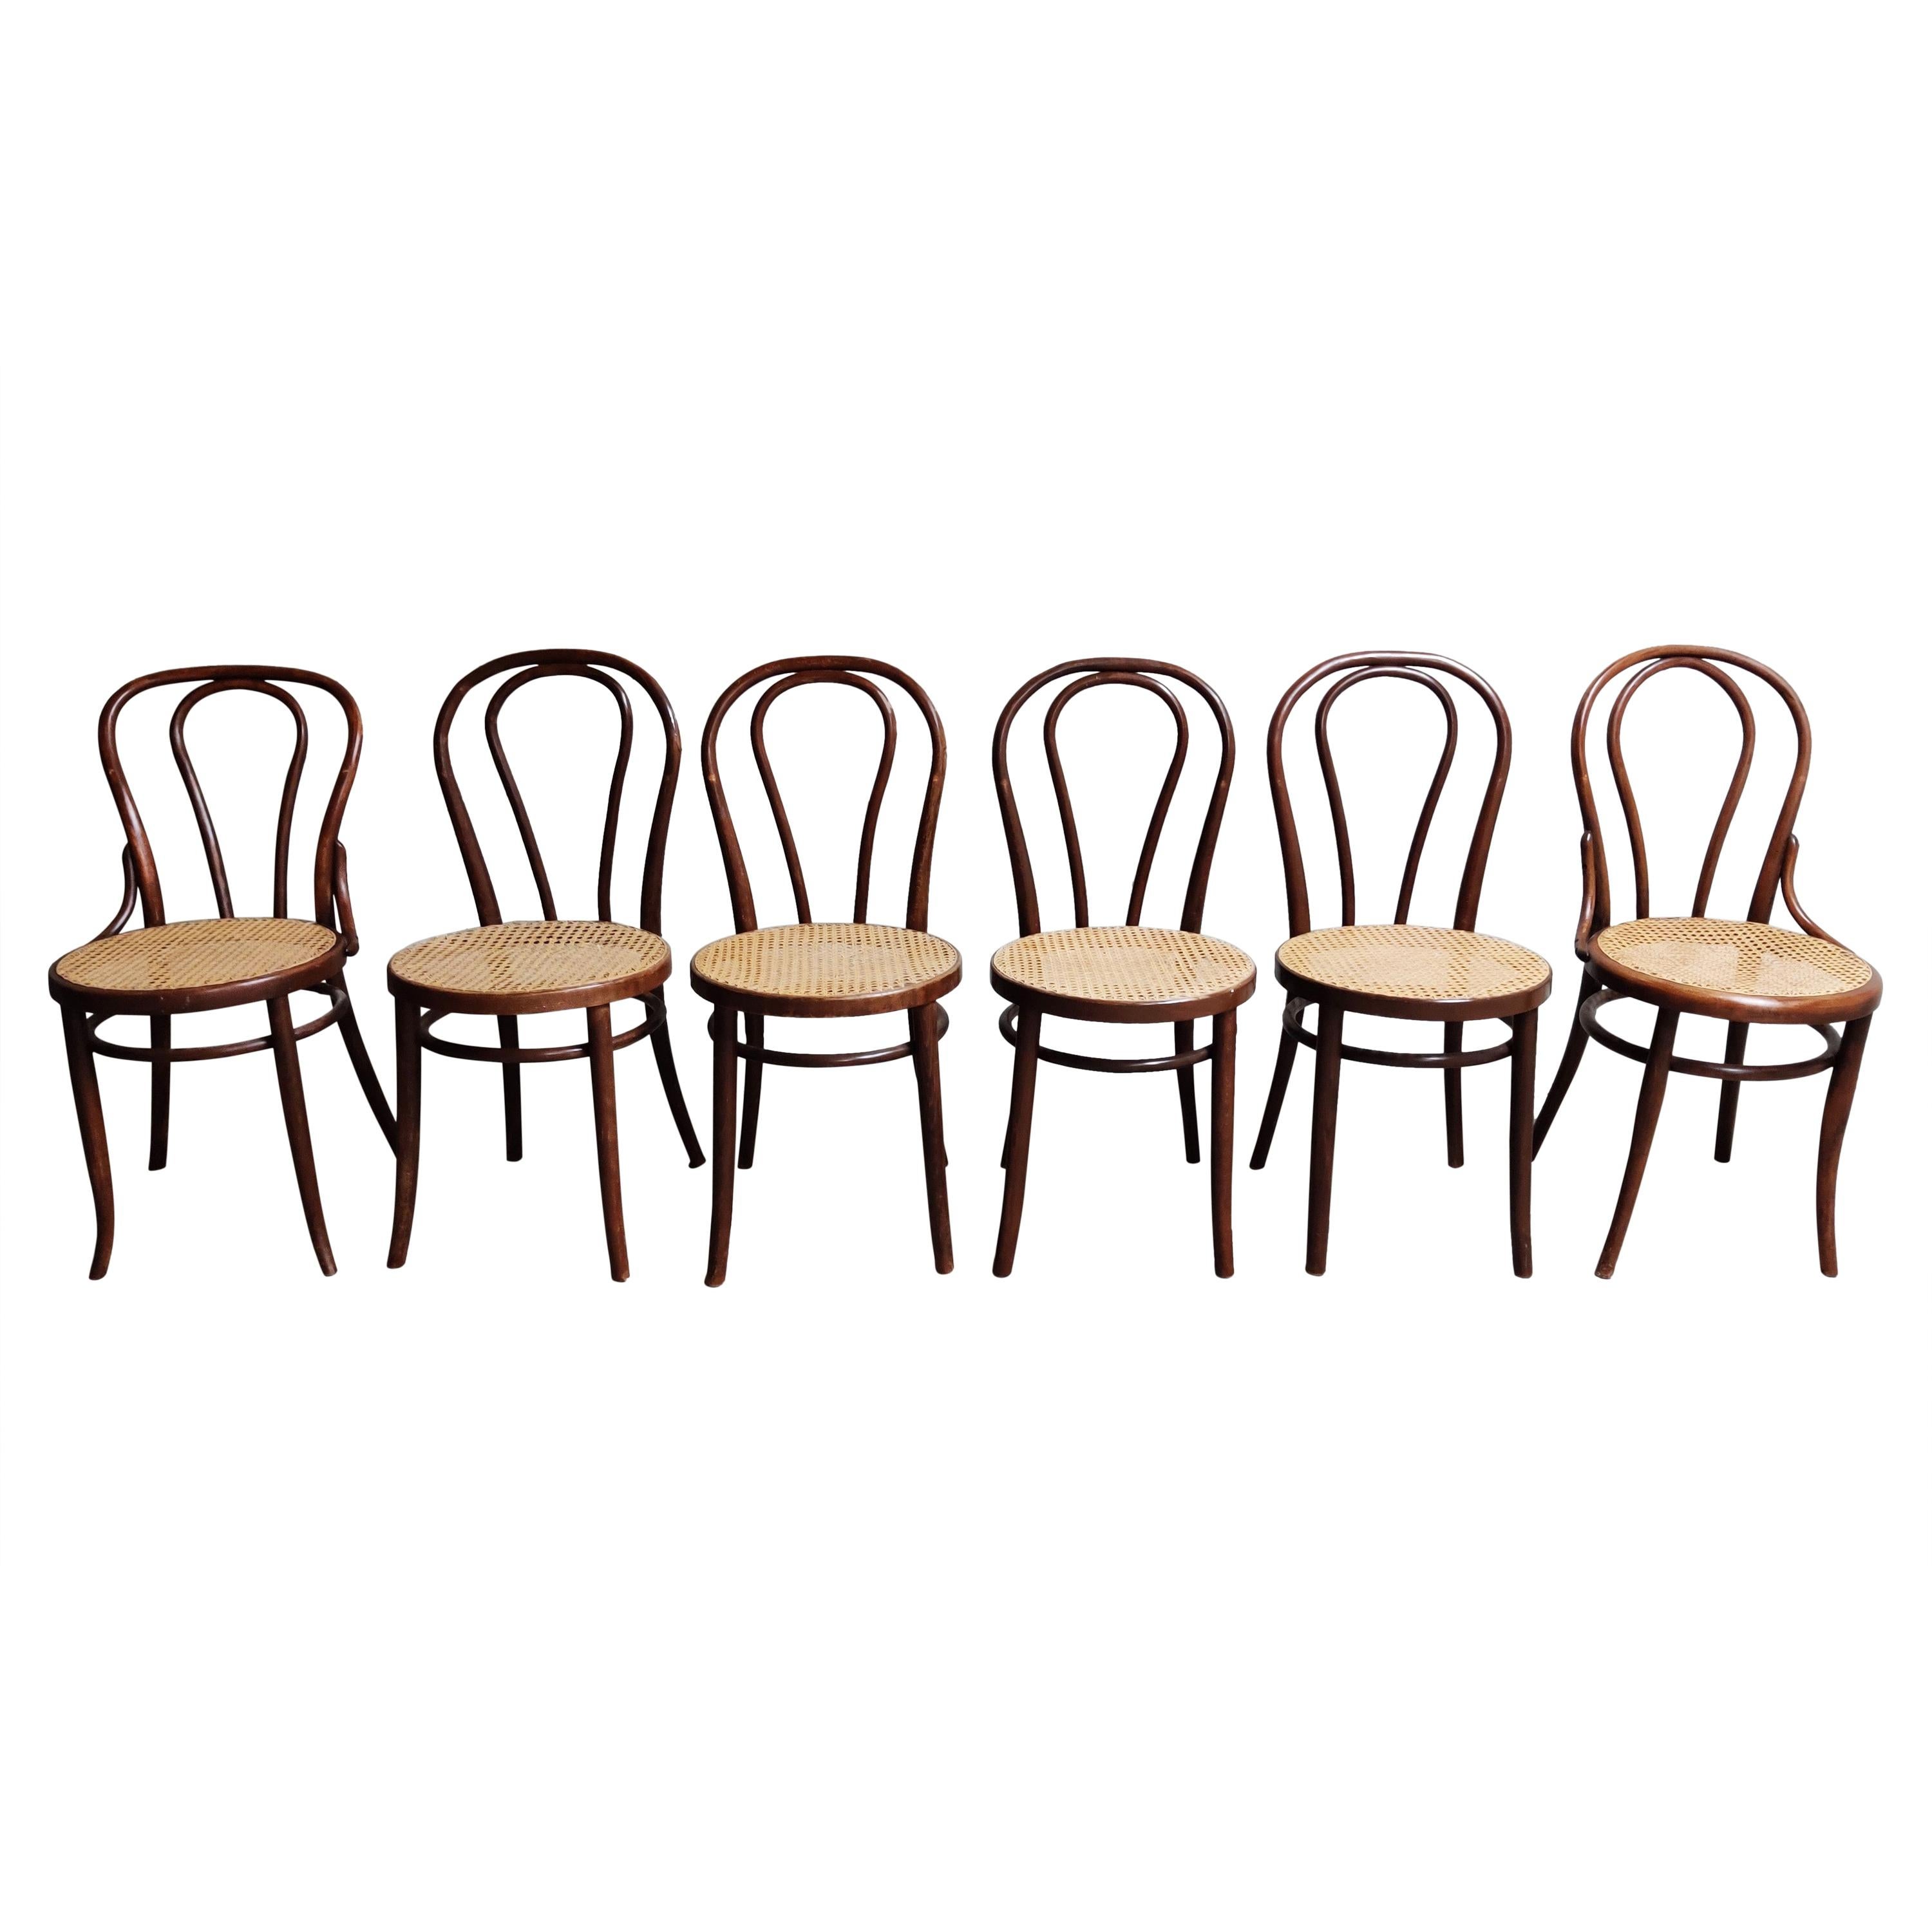 Antique Thonet Dining Chairs, Set of 6